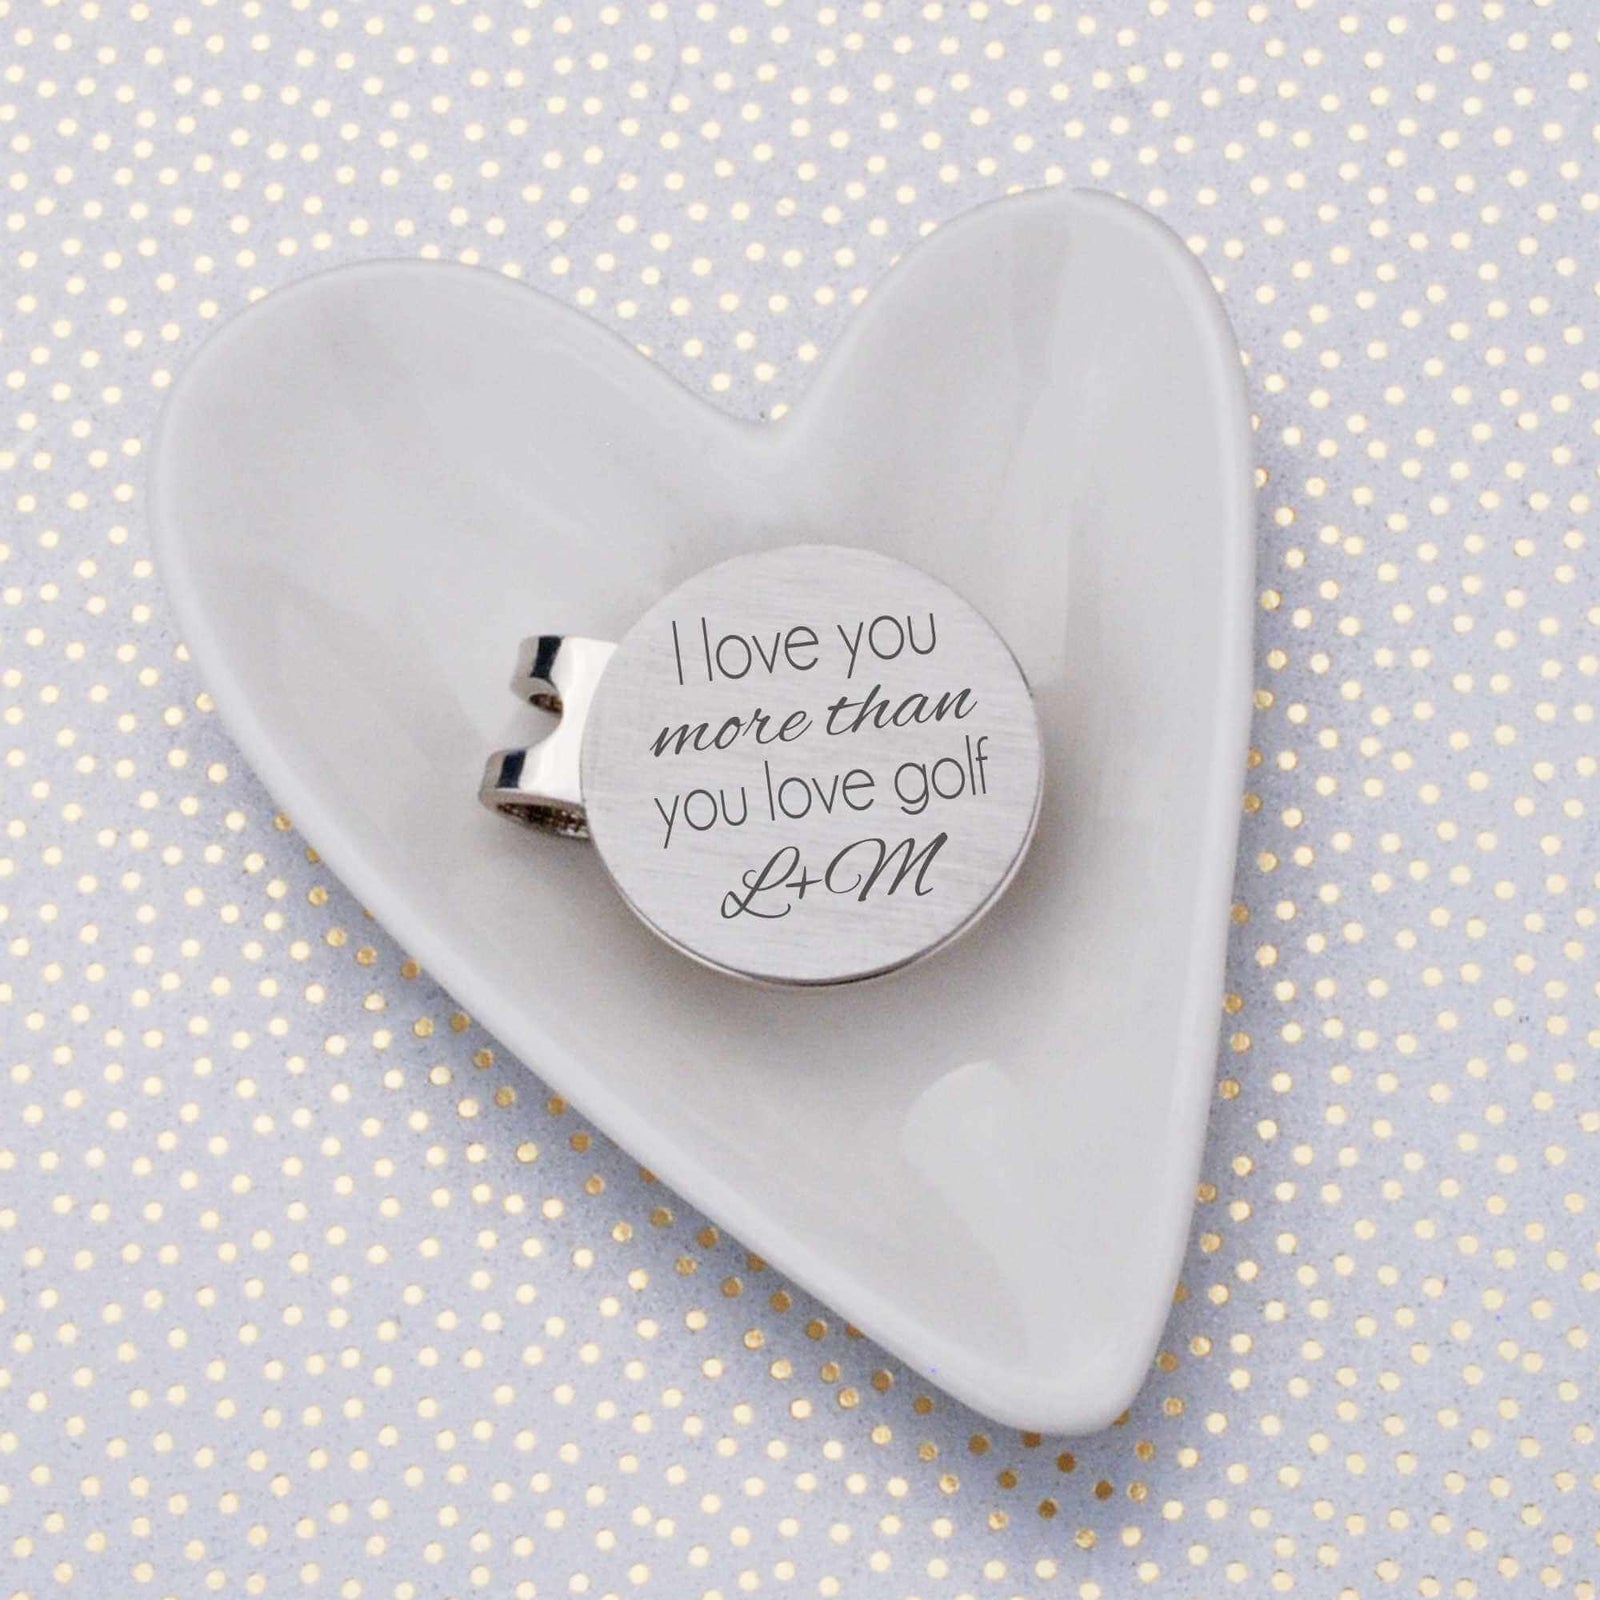 I Love You More Than You Love Golf - Golf Ball Marker